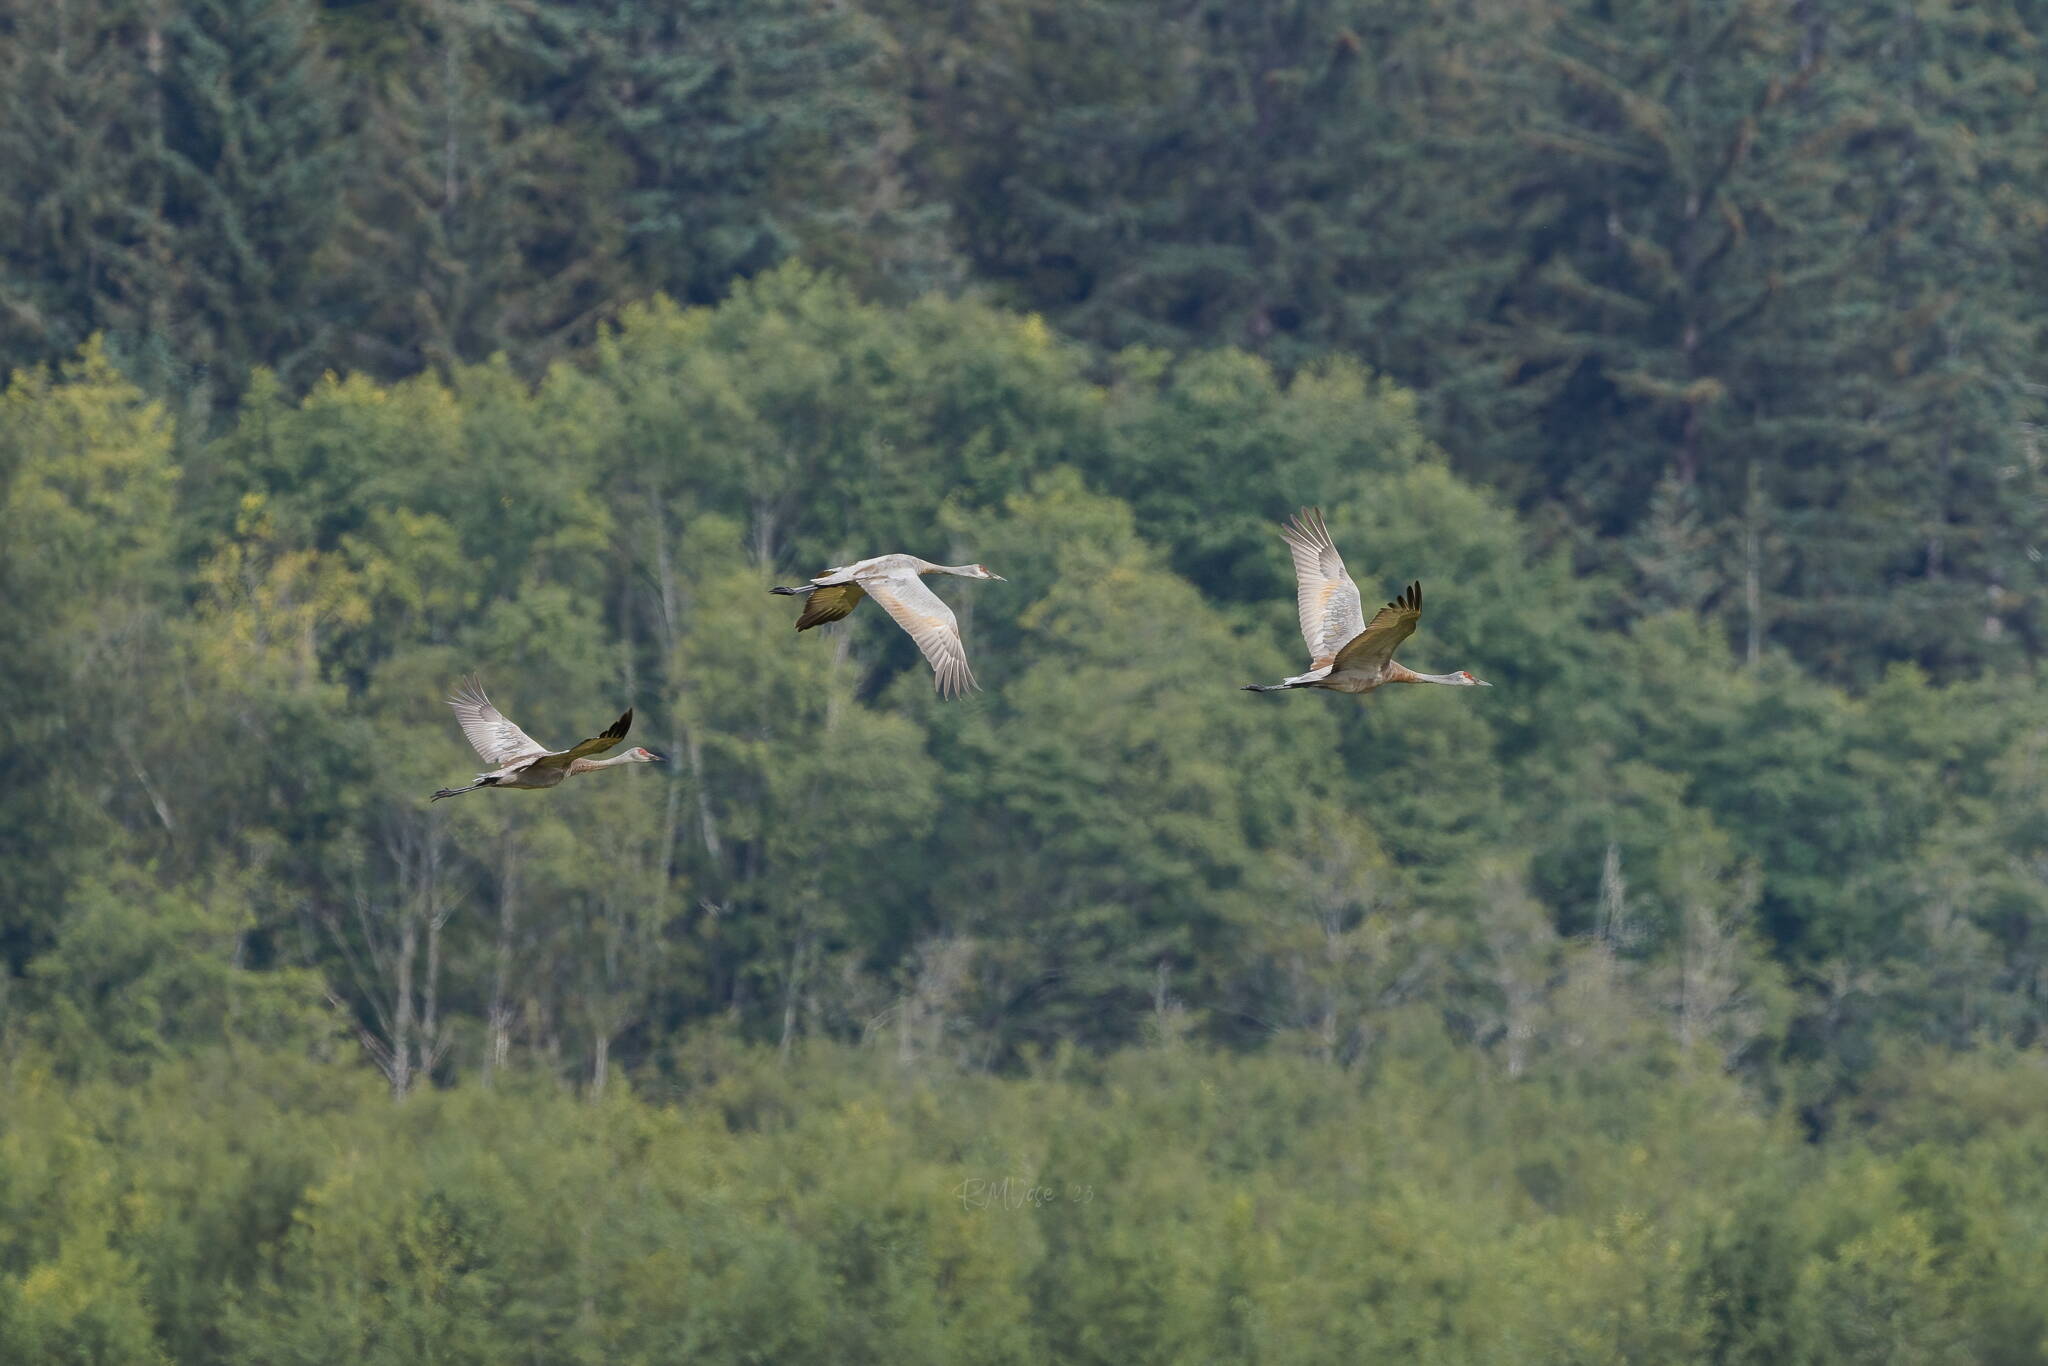 Sandhill cranes fly over the Mendenhall wetlands. (Photo by Gina Vose)